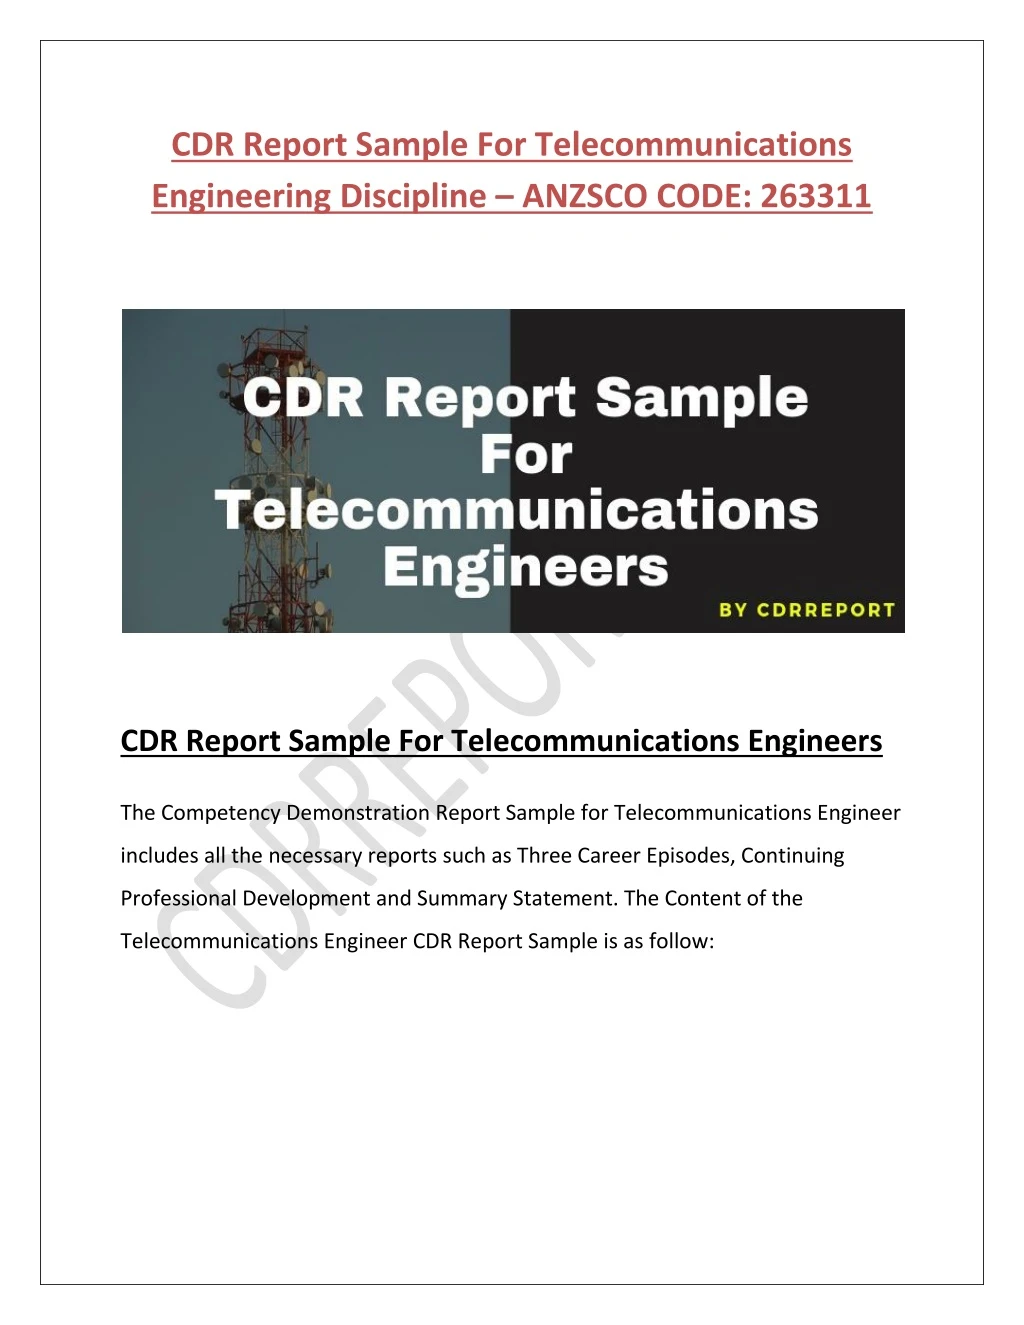 cdr report sample for telecommunications